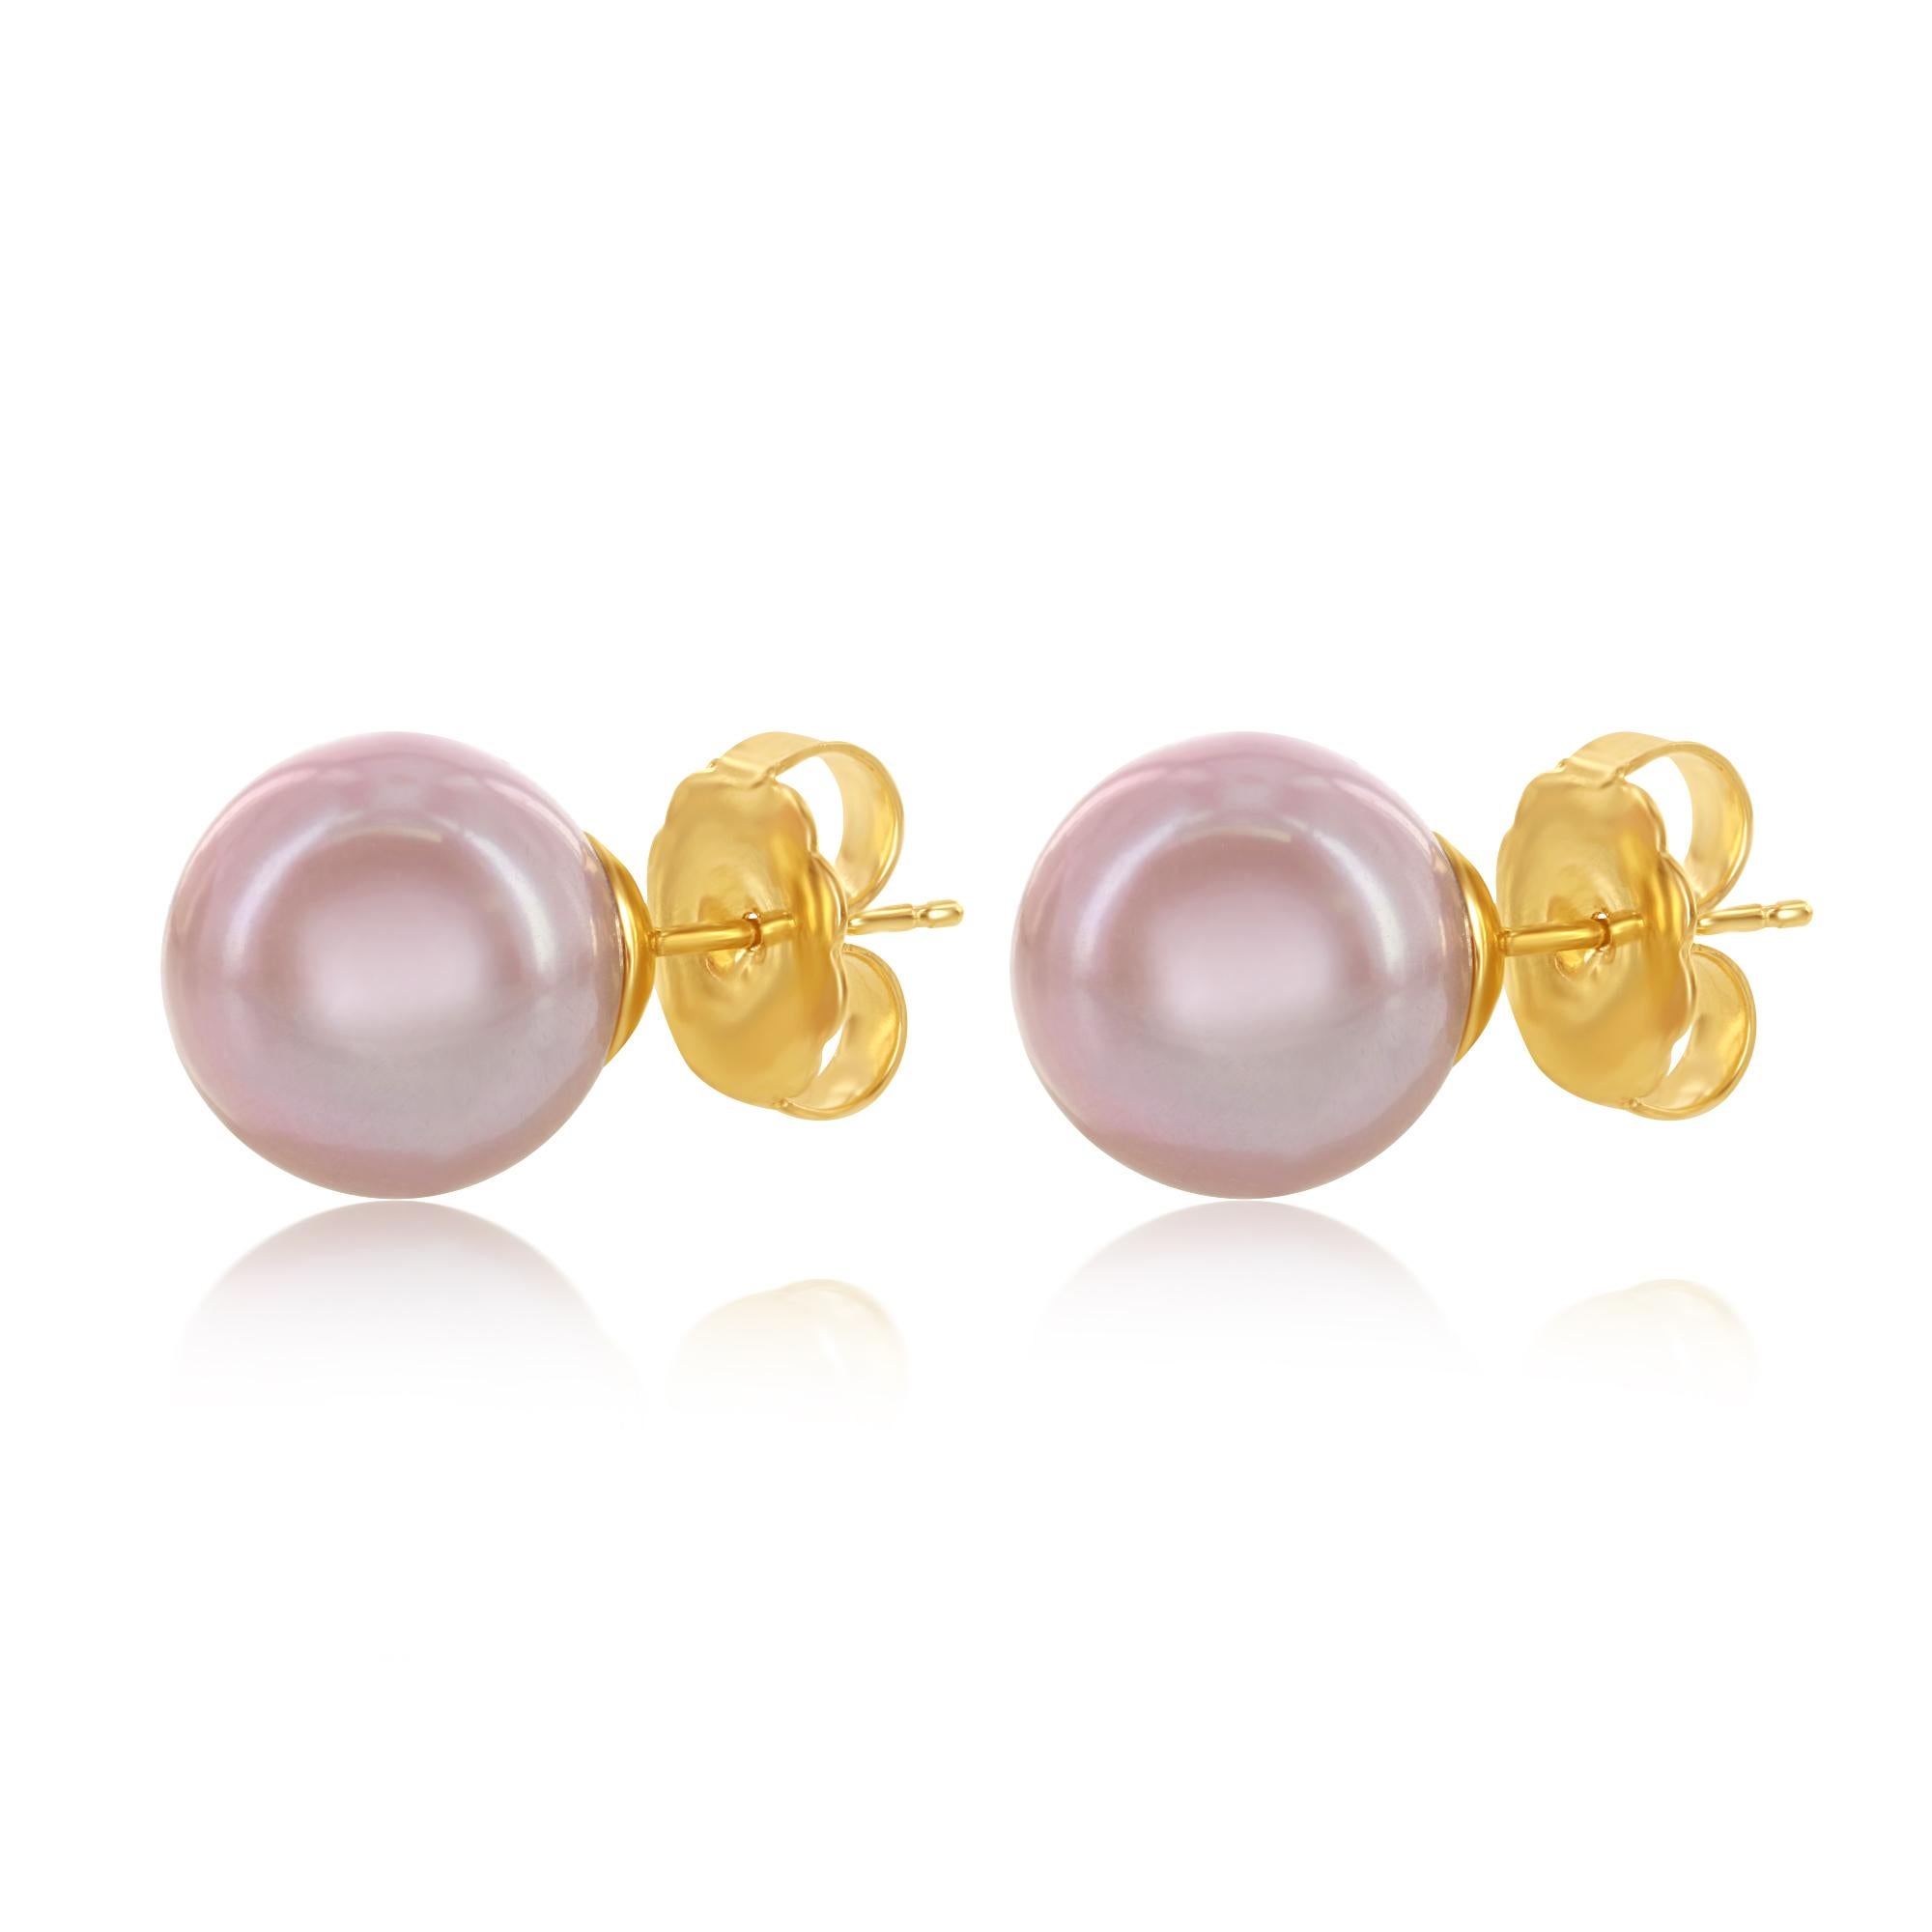 This classic style pearl stud earring is set with Chinese freshwater cultured pearls in a natural pink color. The pearls measure 9.5-10mm and are set on 14 karat yellow gold findings. These versatile earrings are perfect for wearing day or night! 